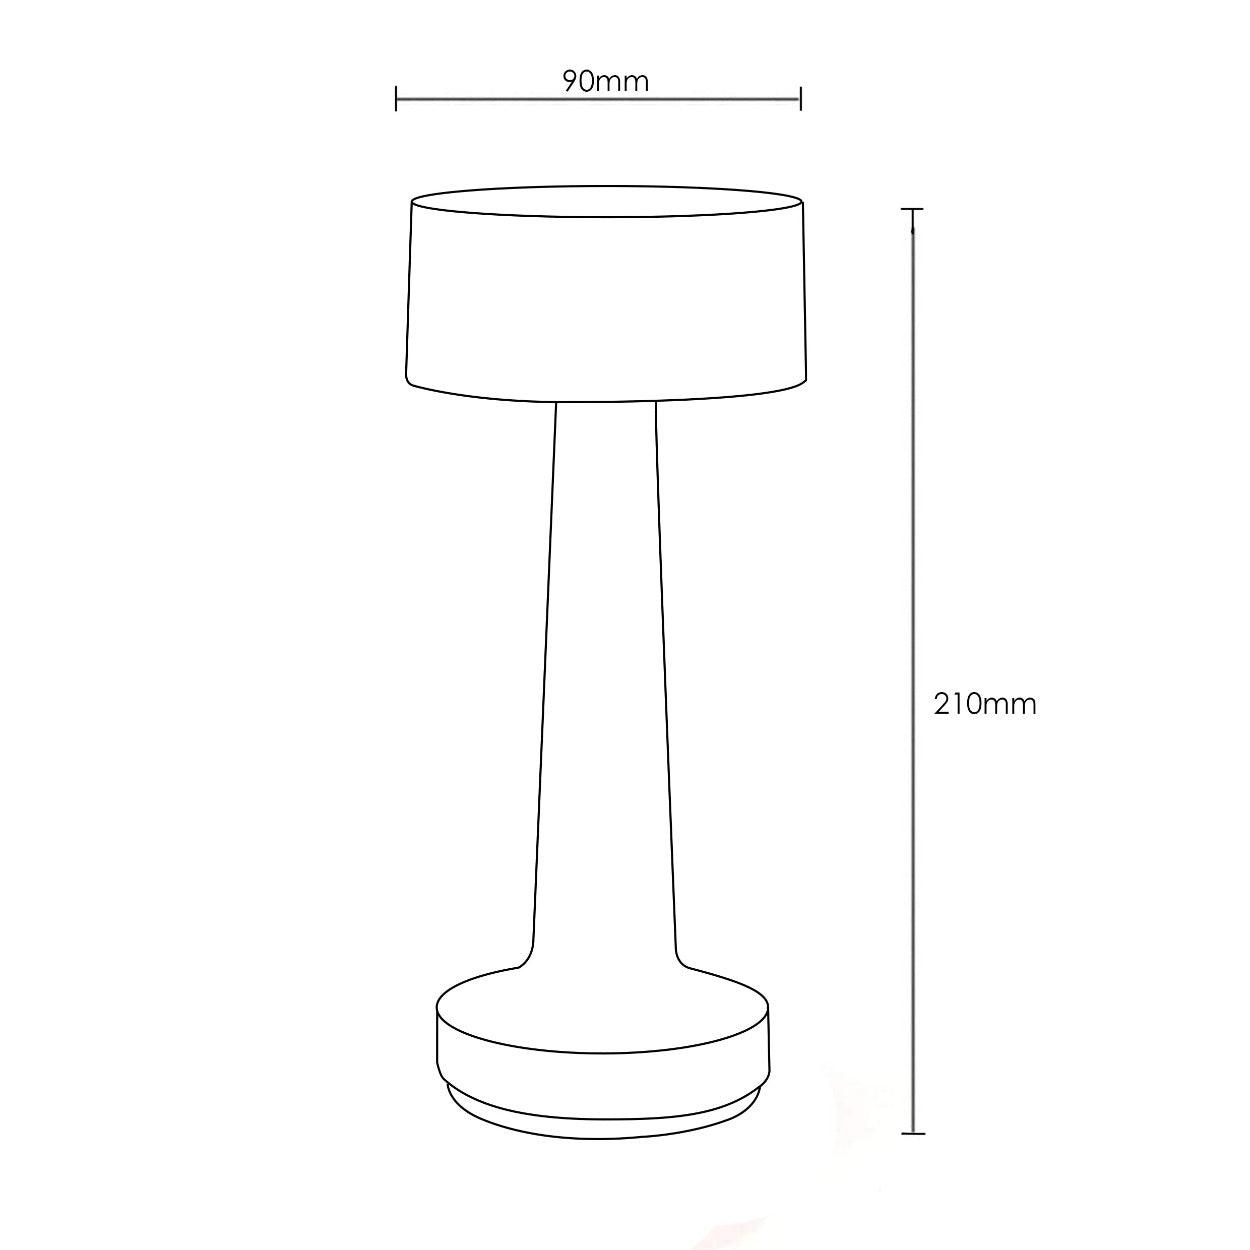 BARBELL RECHARGABLE TOUCH CONTROL WIRELESS BAR TABLE LAMP - Ankur Lighting